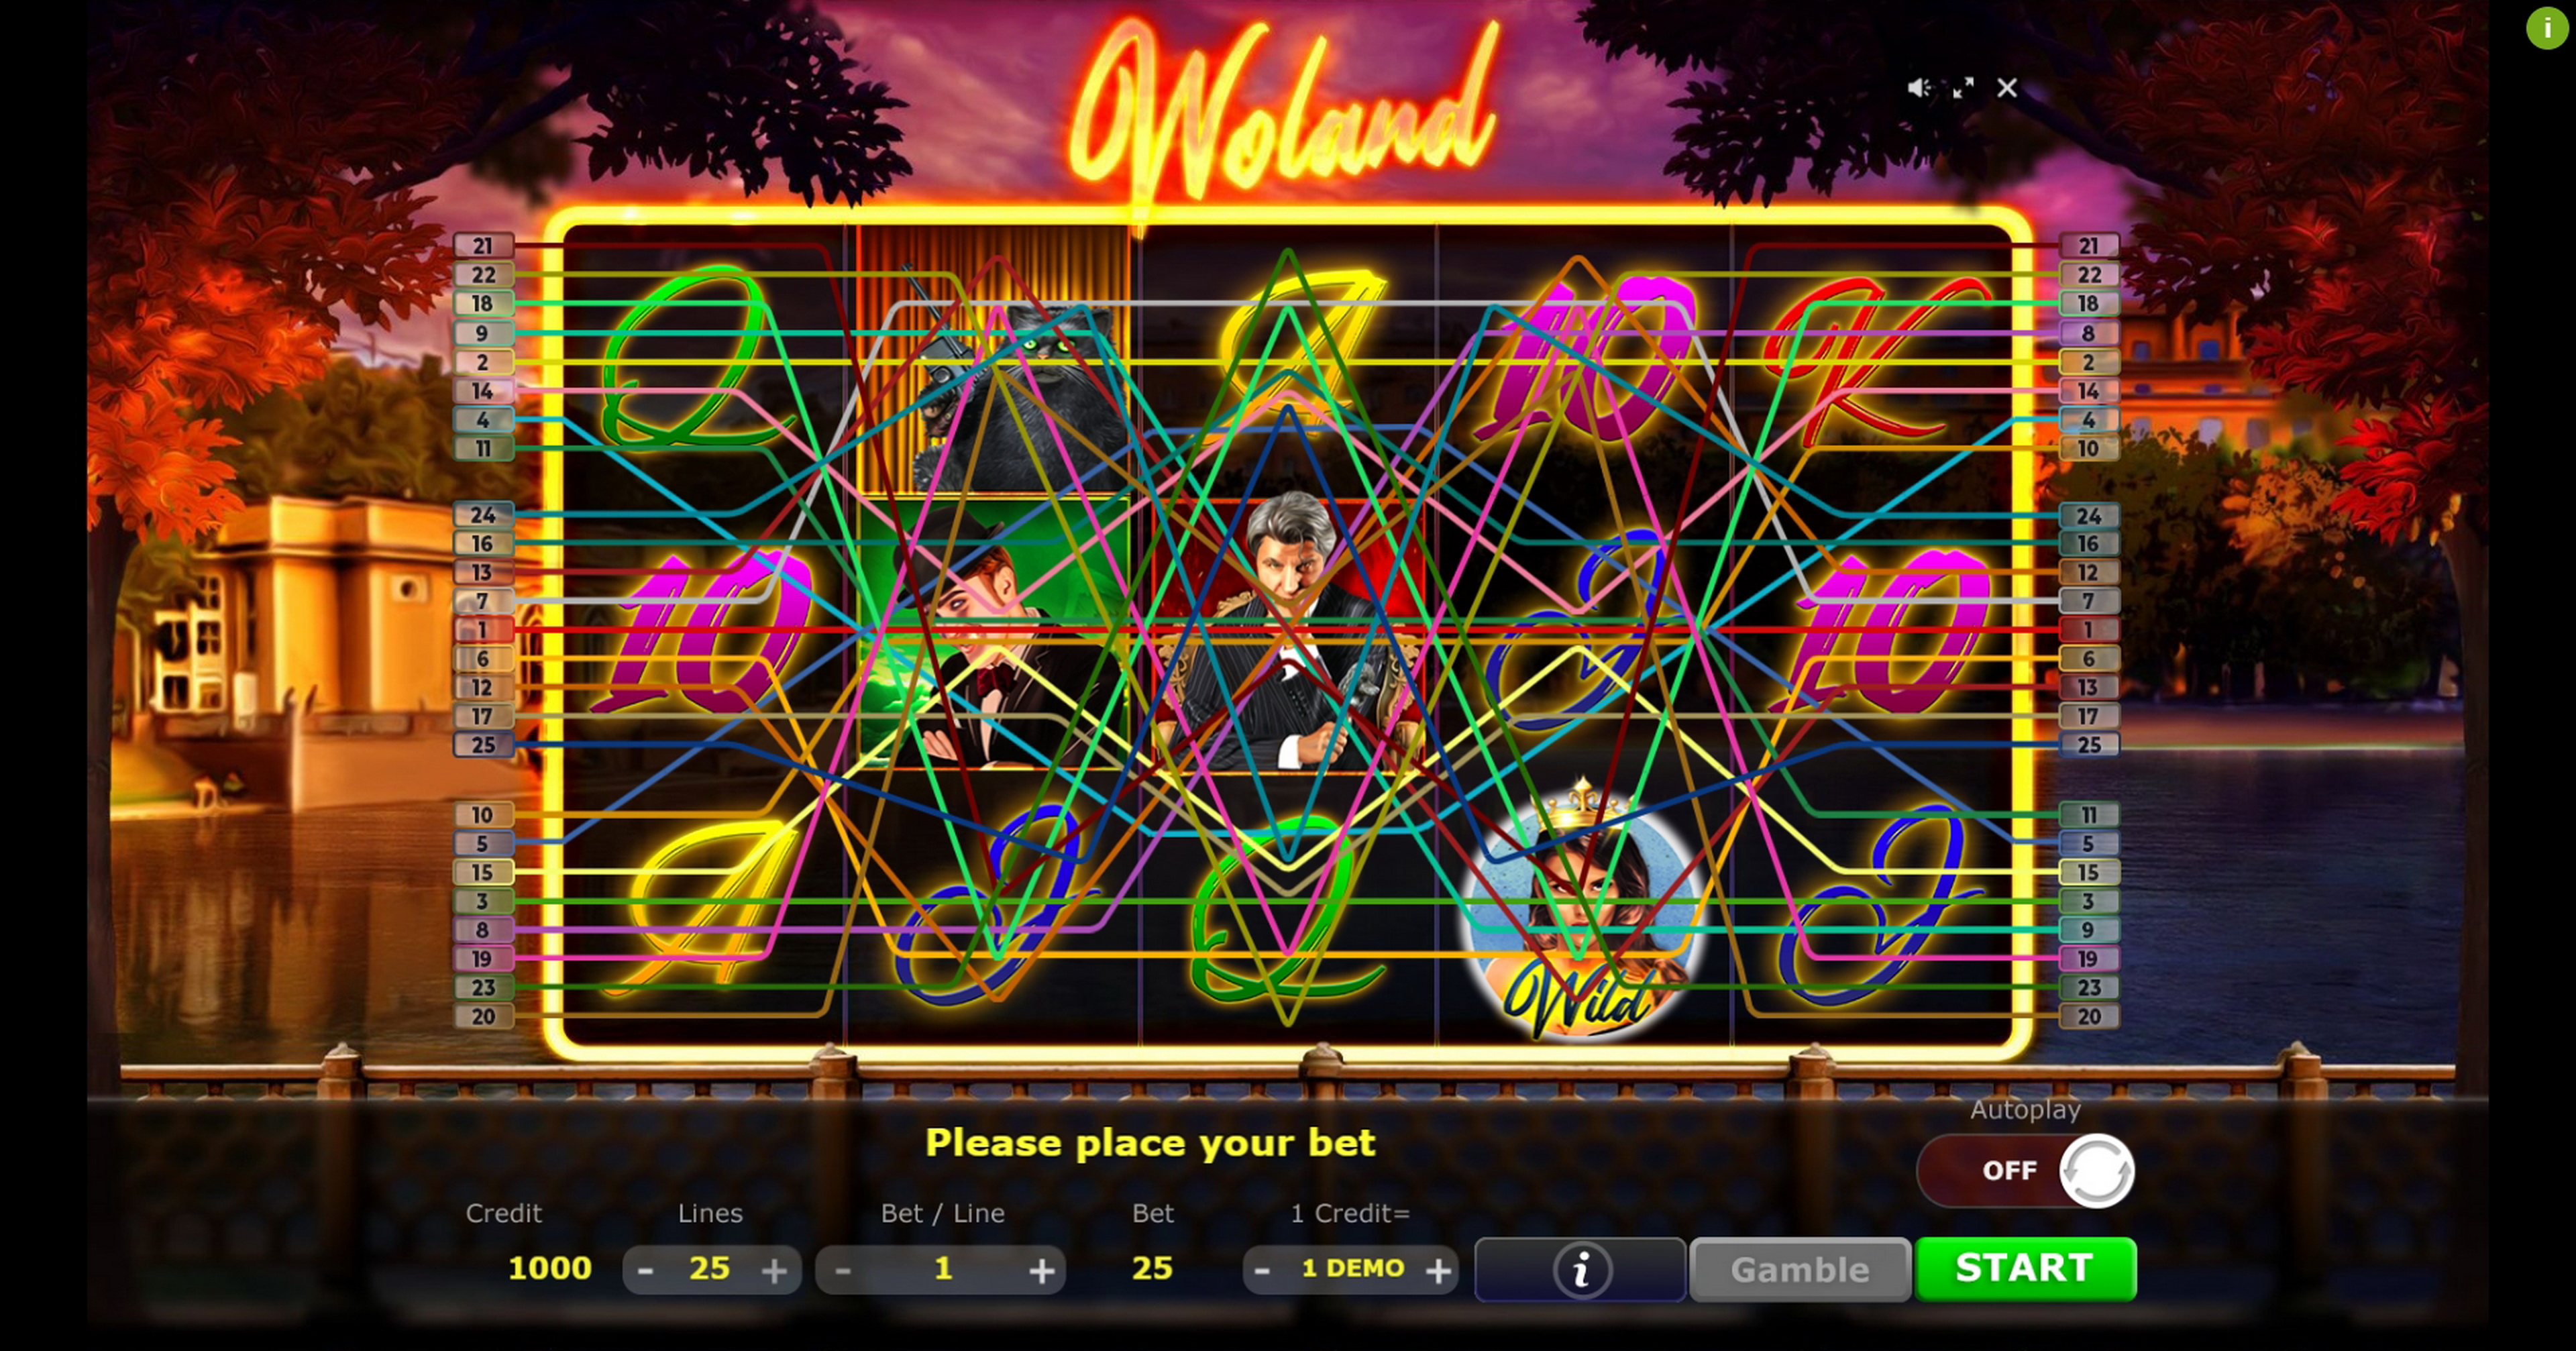 Play Woland Free Casino Slot Game by Five Men Games